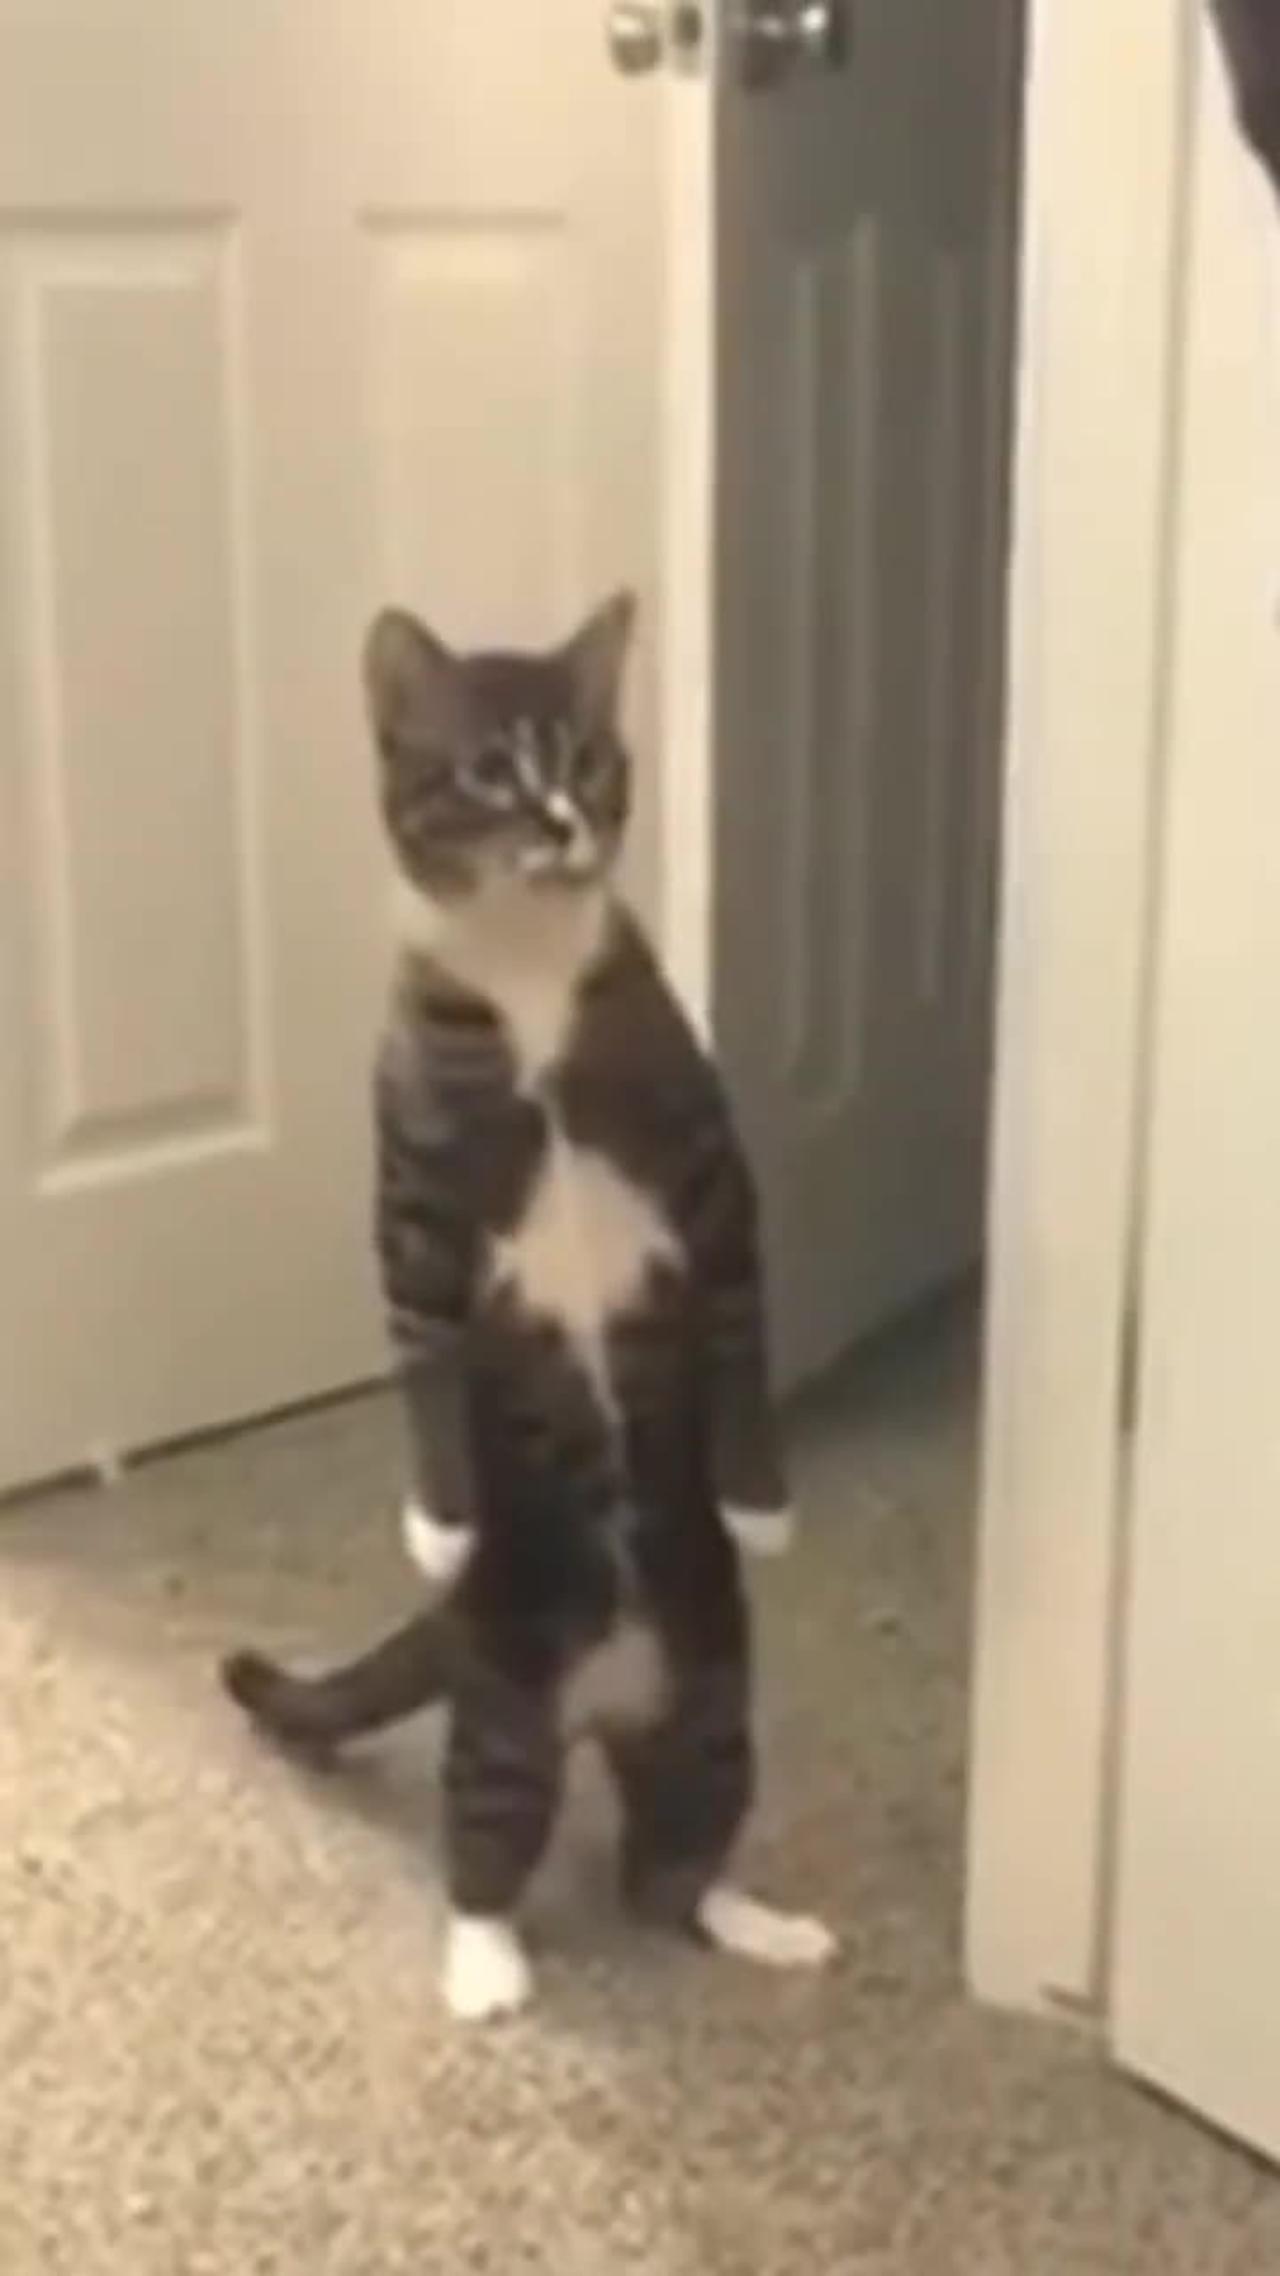 Funny cat reaction